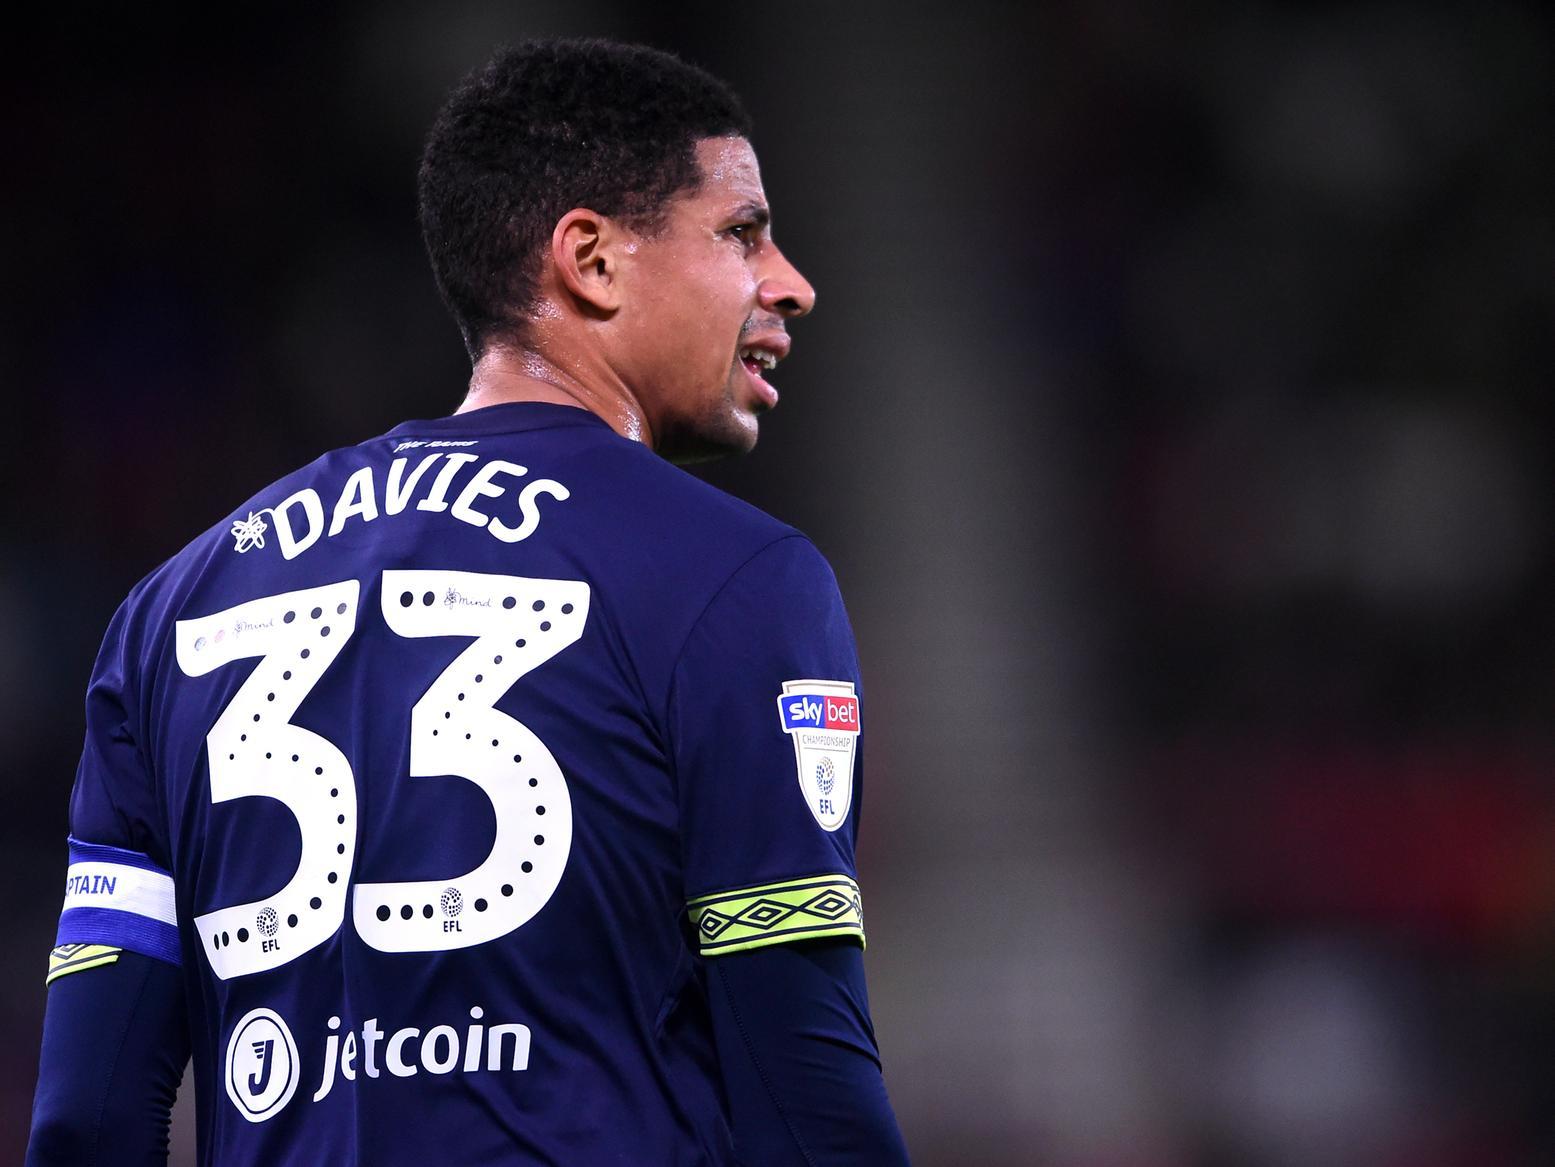 Derby County's veteran defender Curtis Davies has admitted that he harbours hopes of one day returning to his boyhood club Luton Town, either as a player or manager in the future. (Dunstable Today)